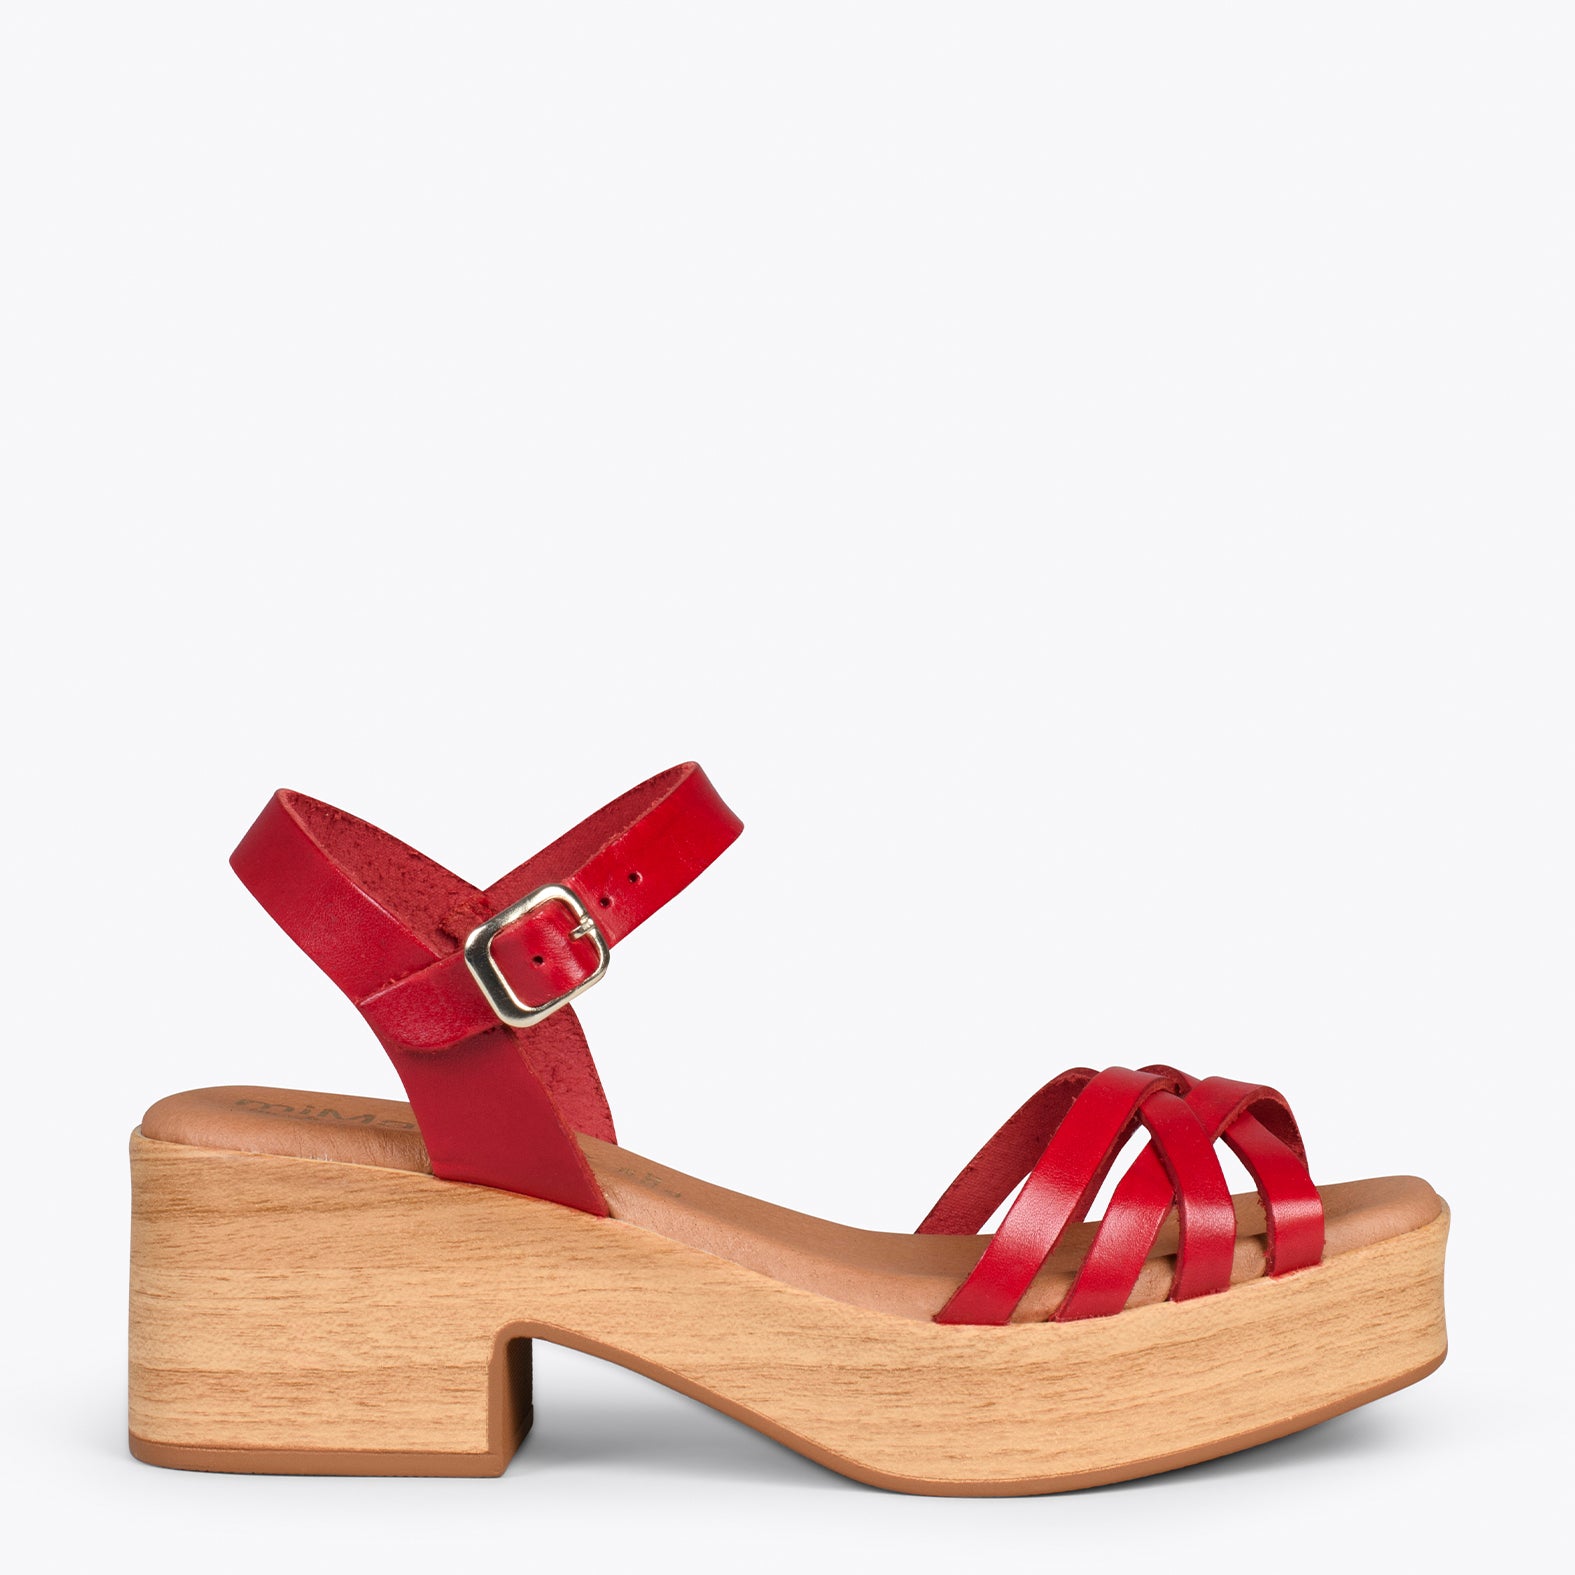 WOOD – RED strappy sandal with wooden heel